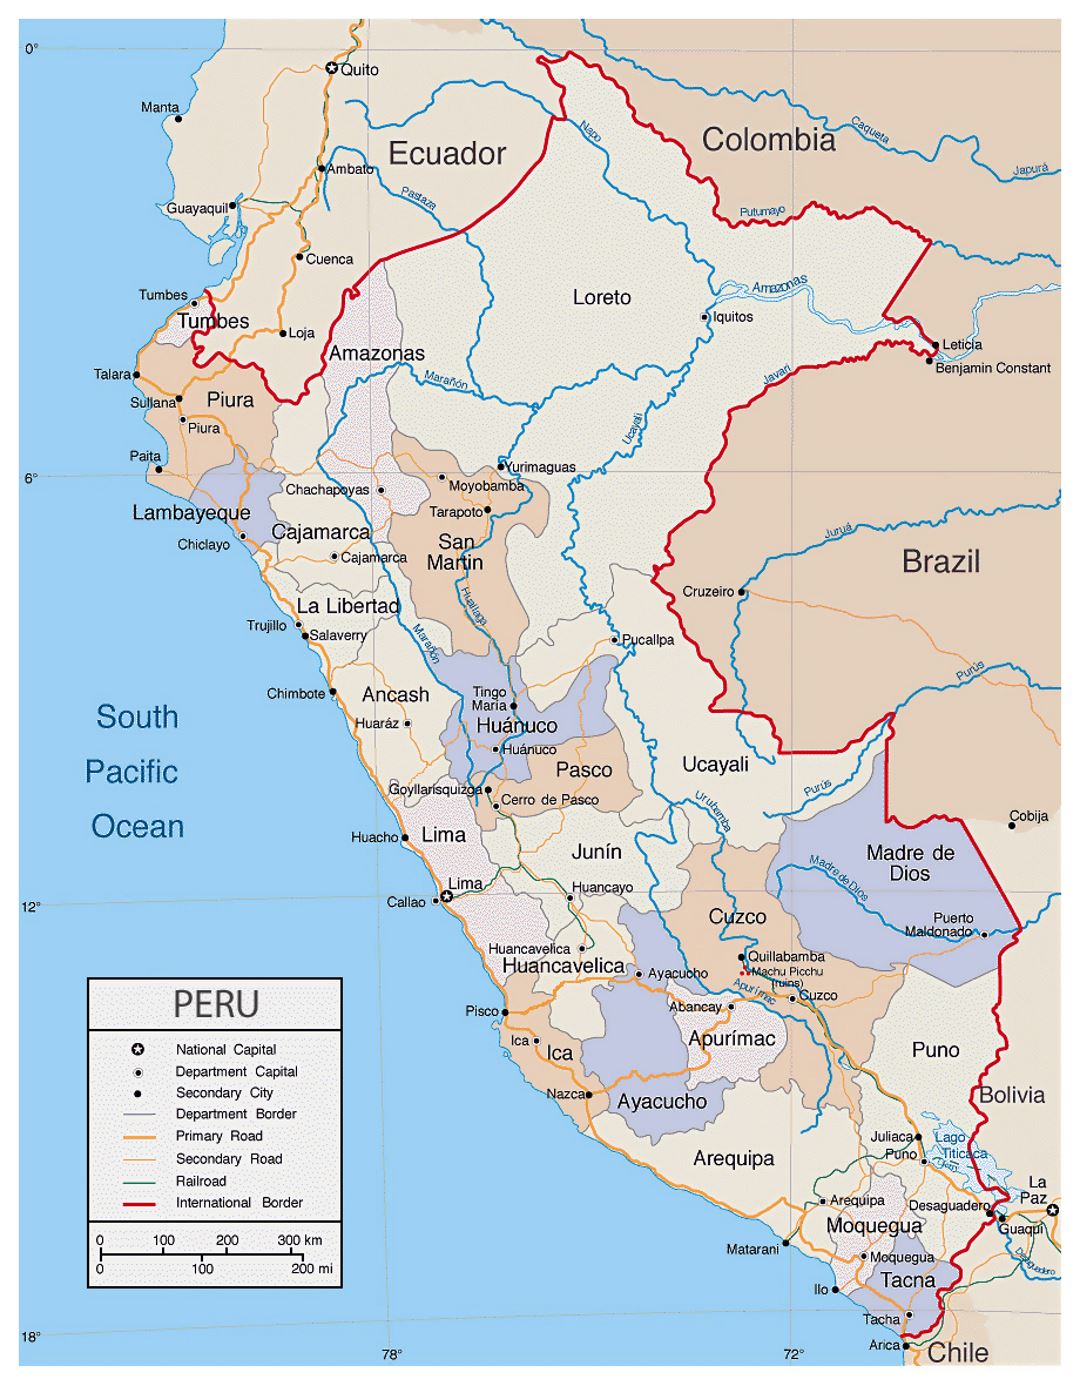 Detailed political and administrative map of Peru